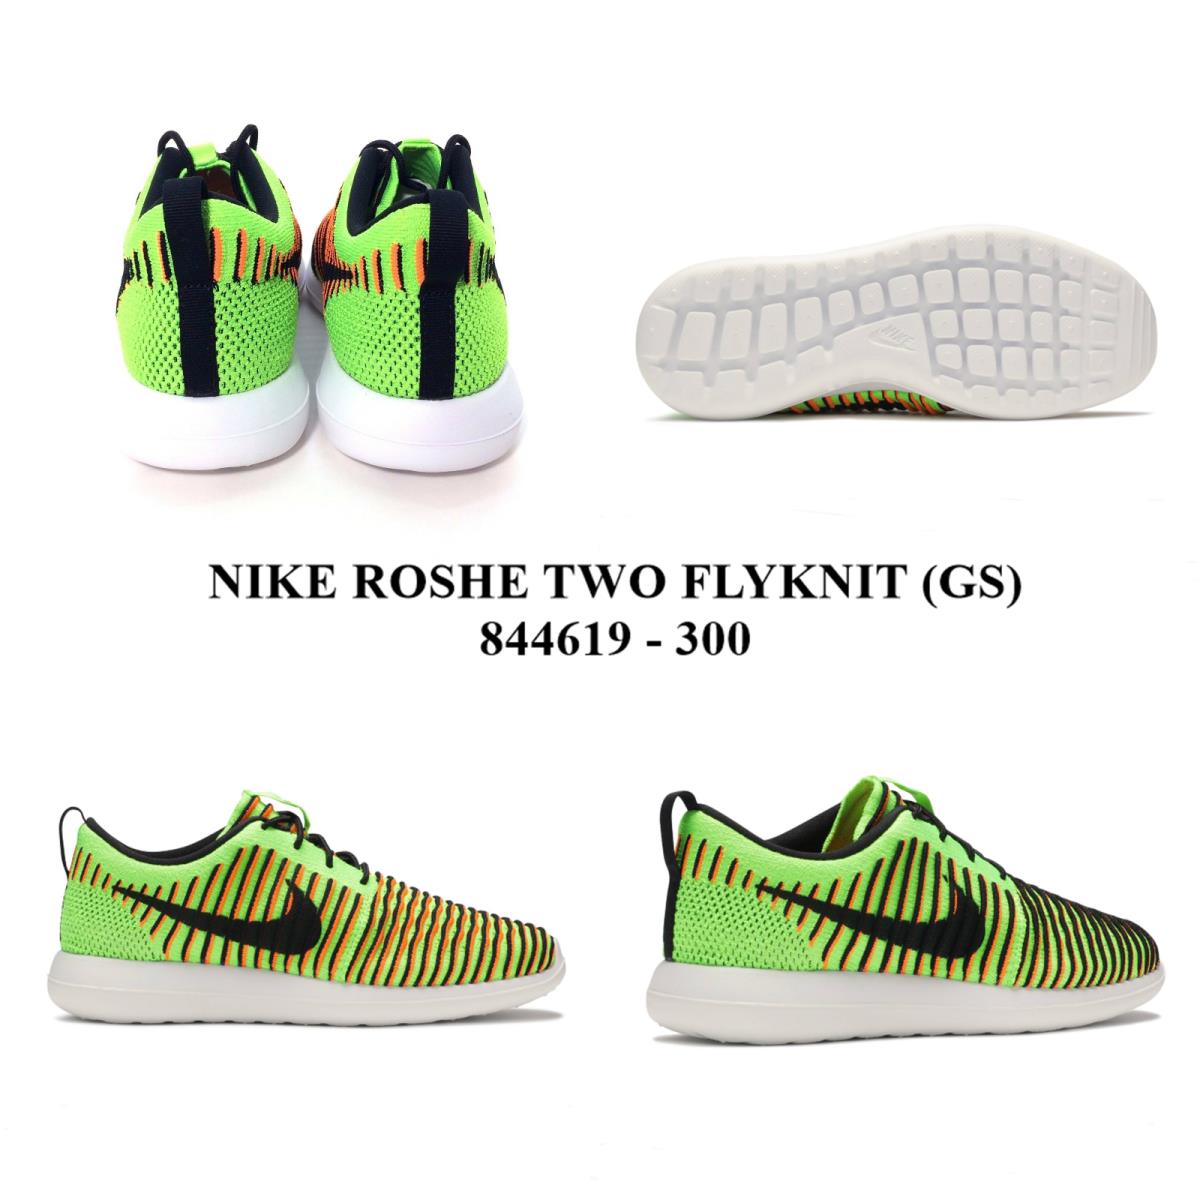 Nike Roshe Two Flyknit GS 844619 - 300 Casual Sneakers Shoes NO Lid